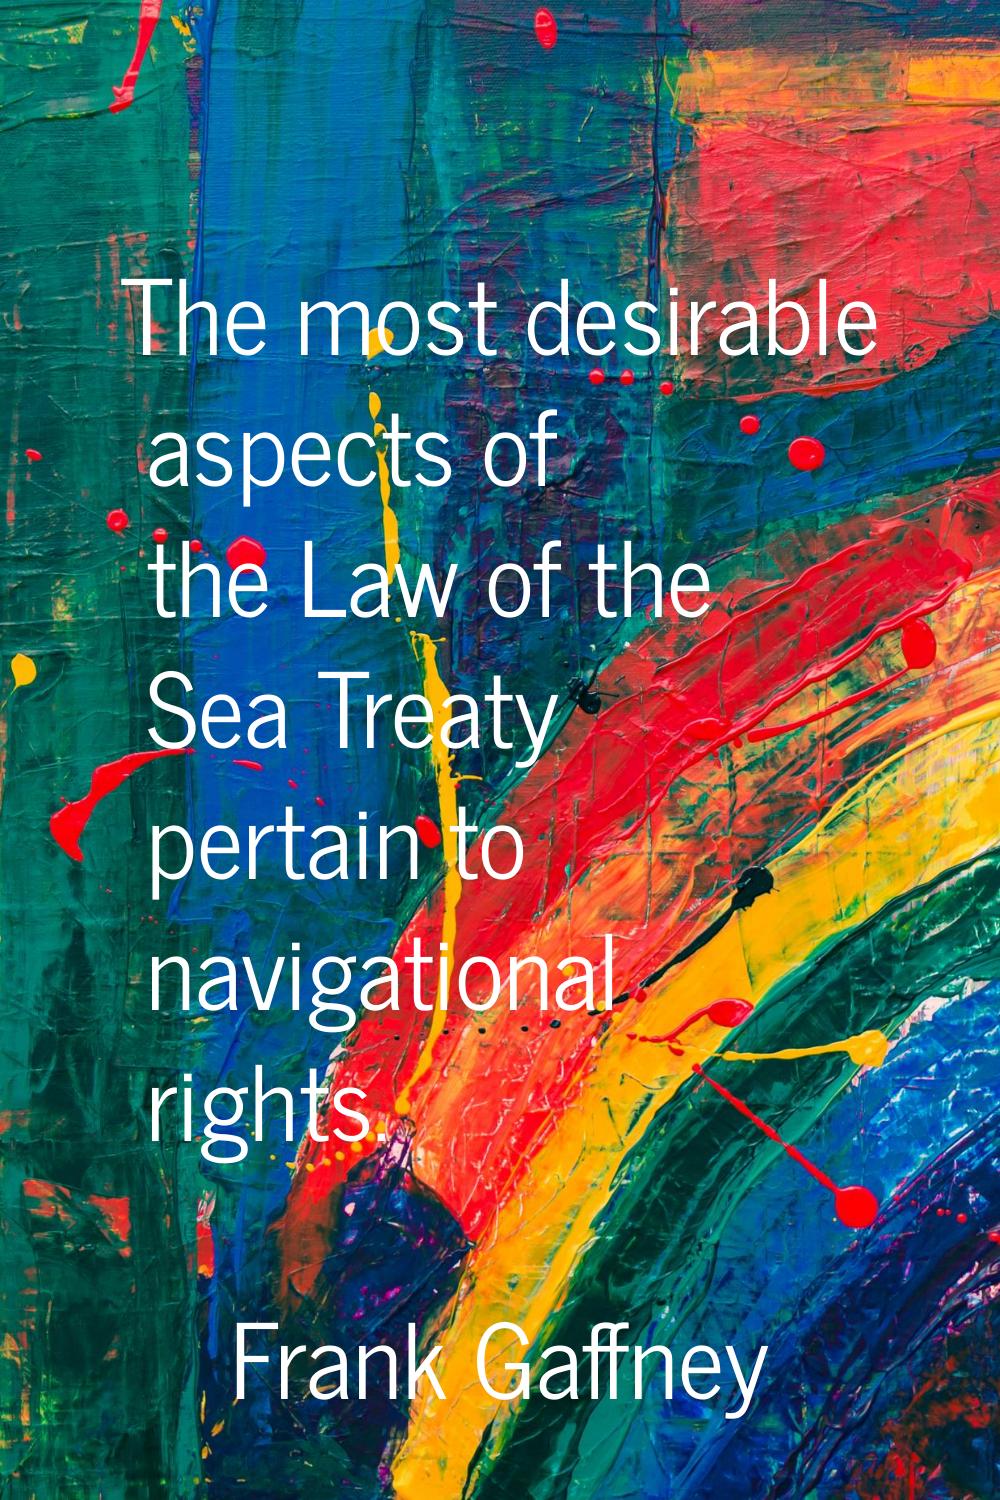 The most desirable aspects of the Law of the Sea Treaty pertain to navigational rights.